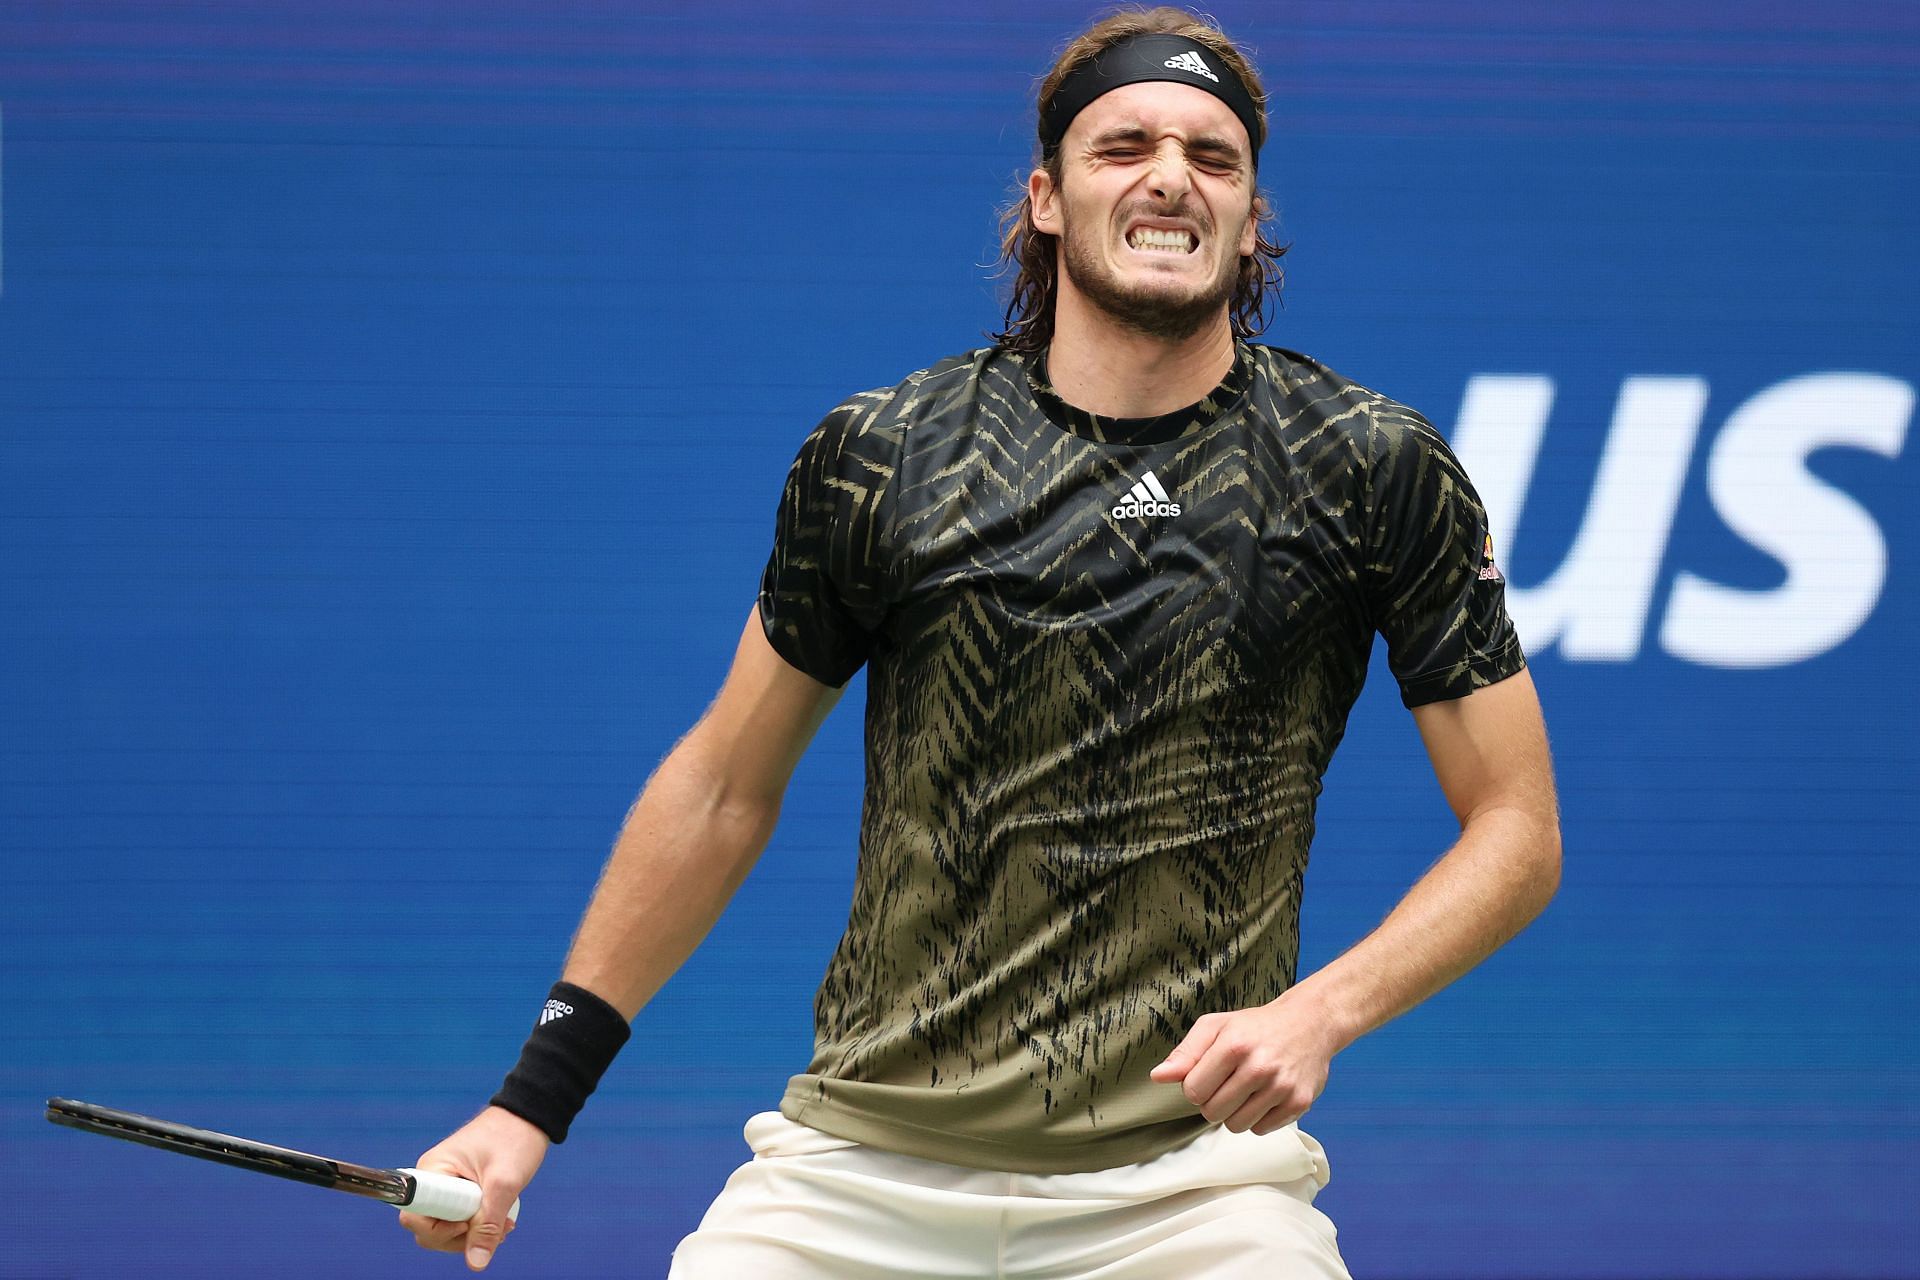 Stefanos Tsitsipas could win the US Open next fortnight.